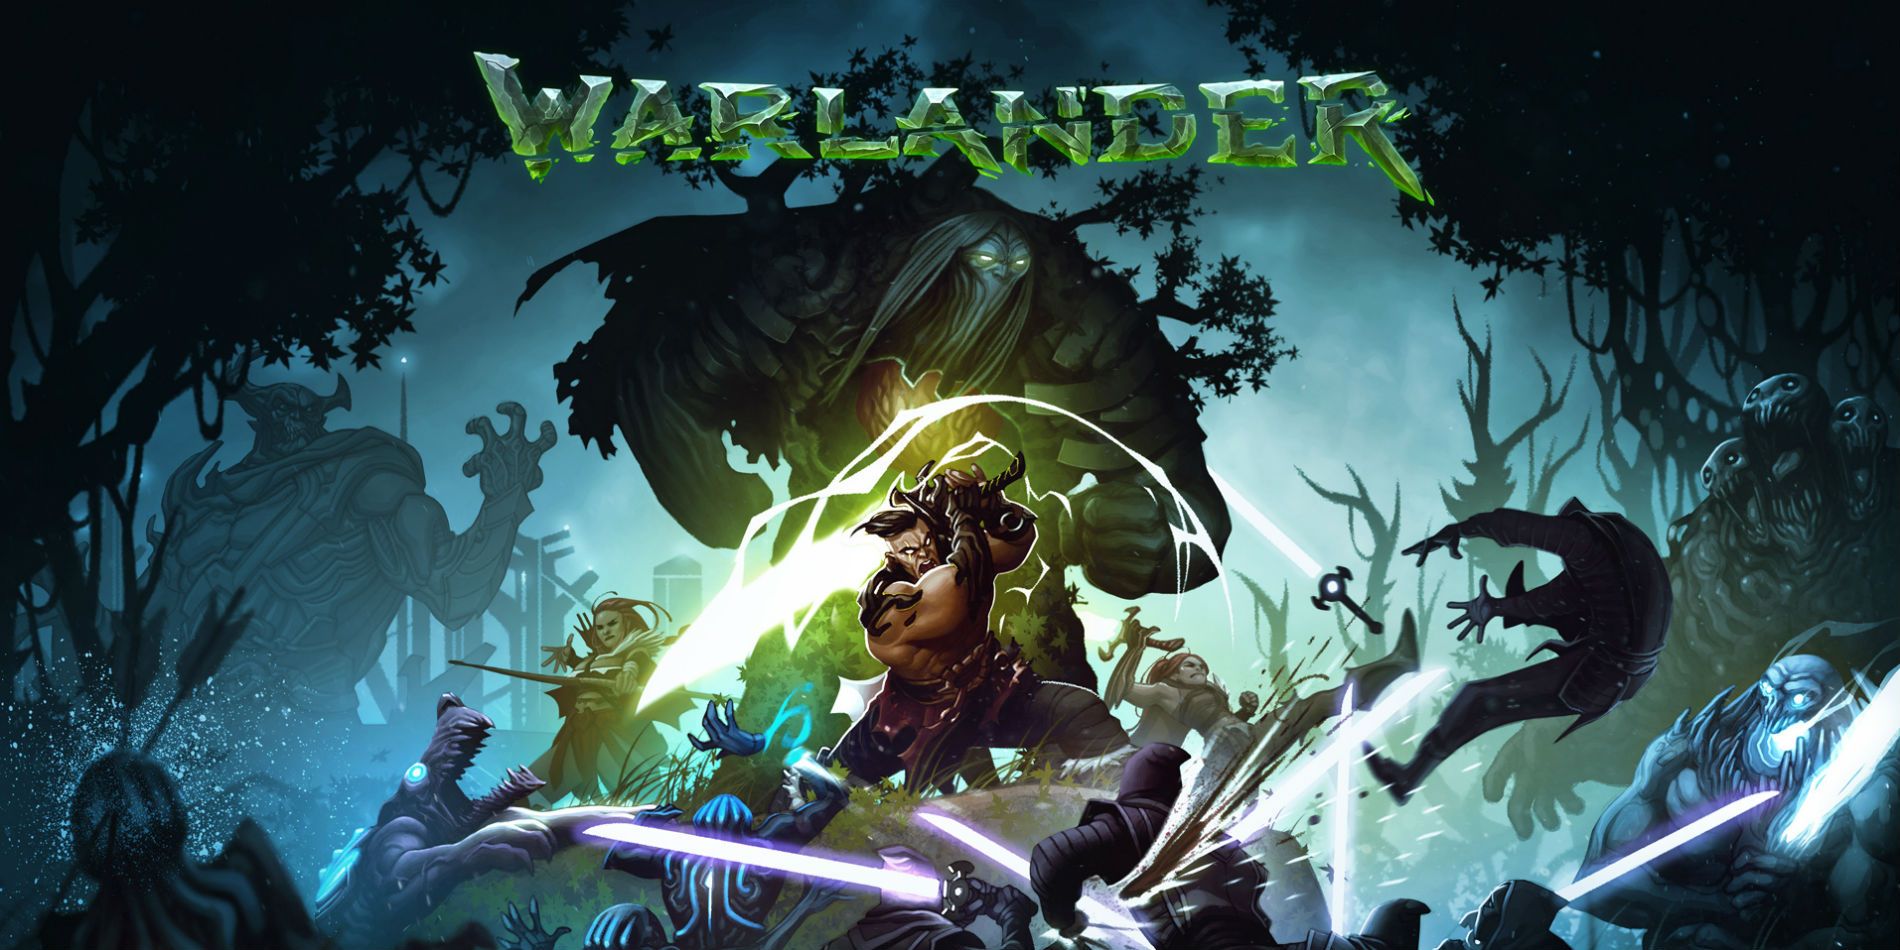 Poster from Warlander